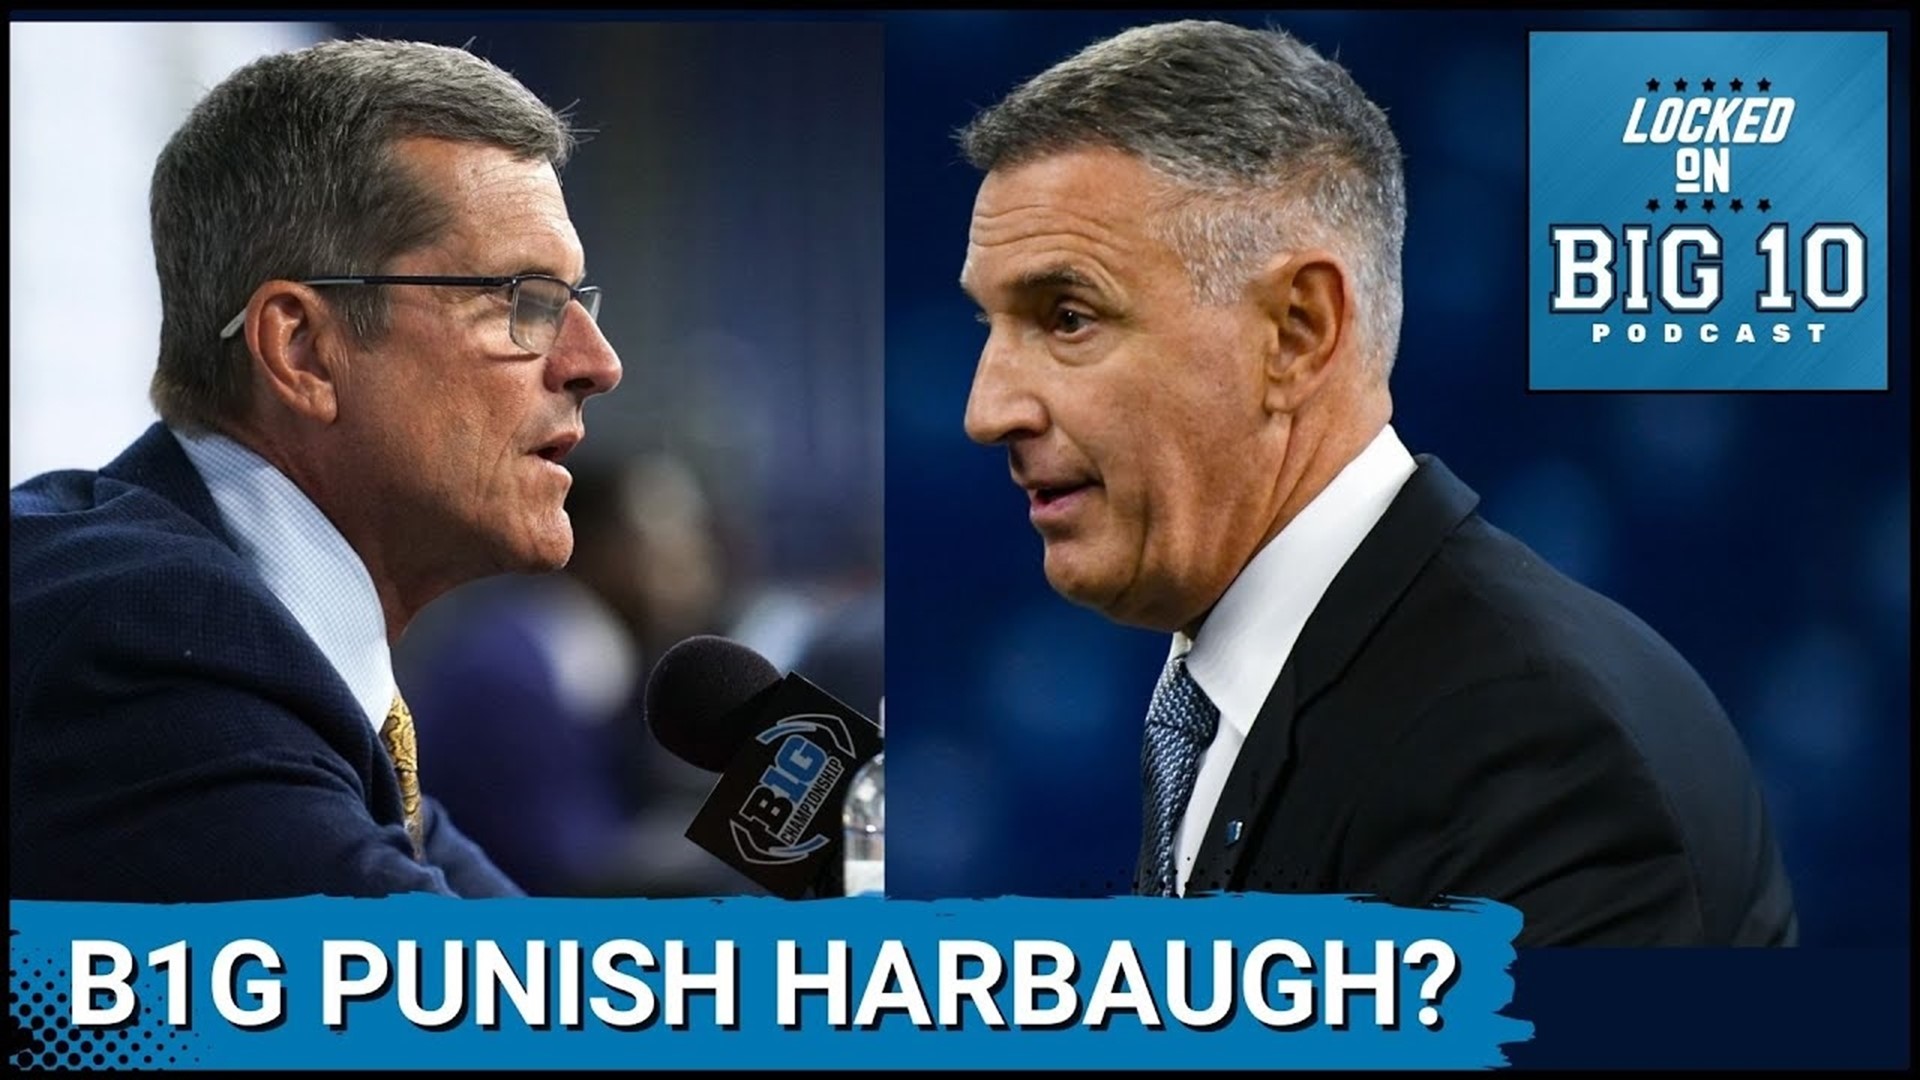 Will Big 10 Commissioner Tony Petitti step in and punish coach Jim Harbaugh and his Michigan Wolverines football program for the SpyGate controversy?